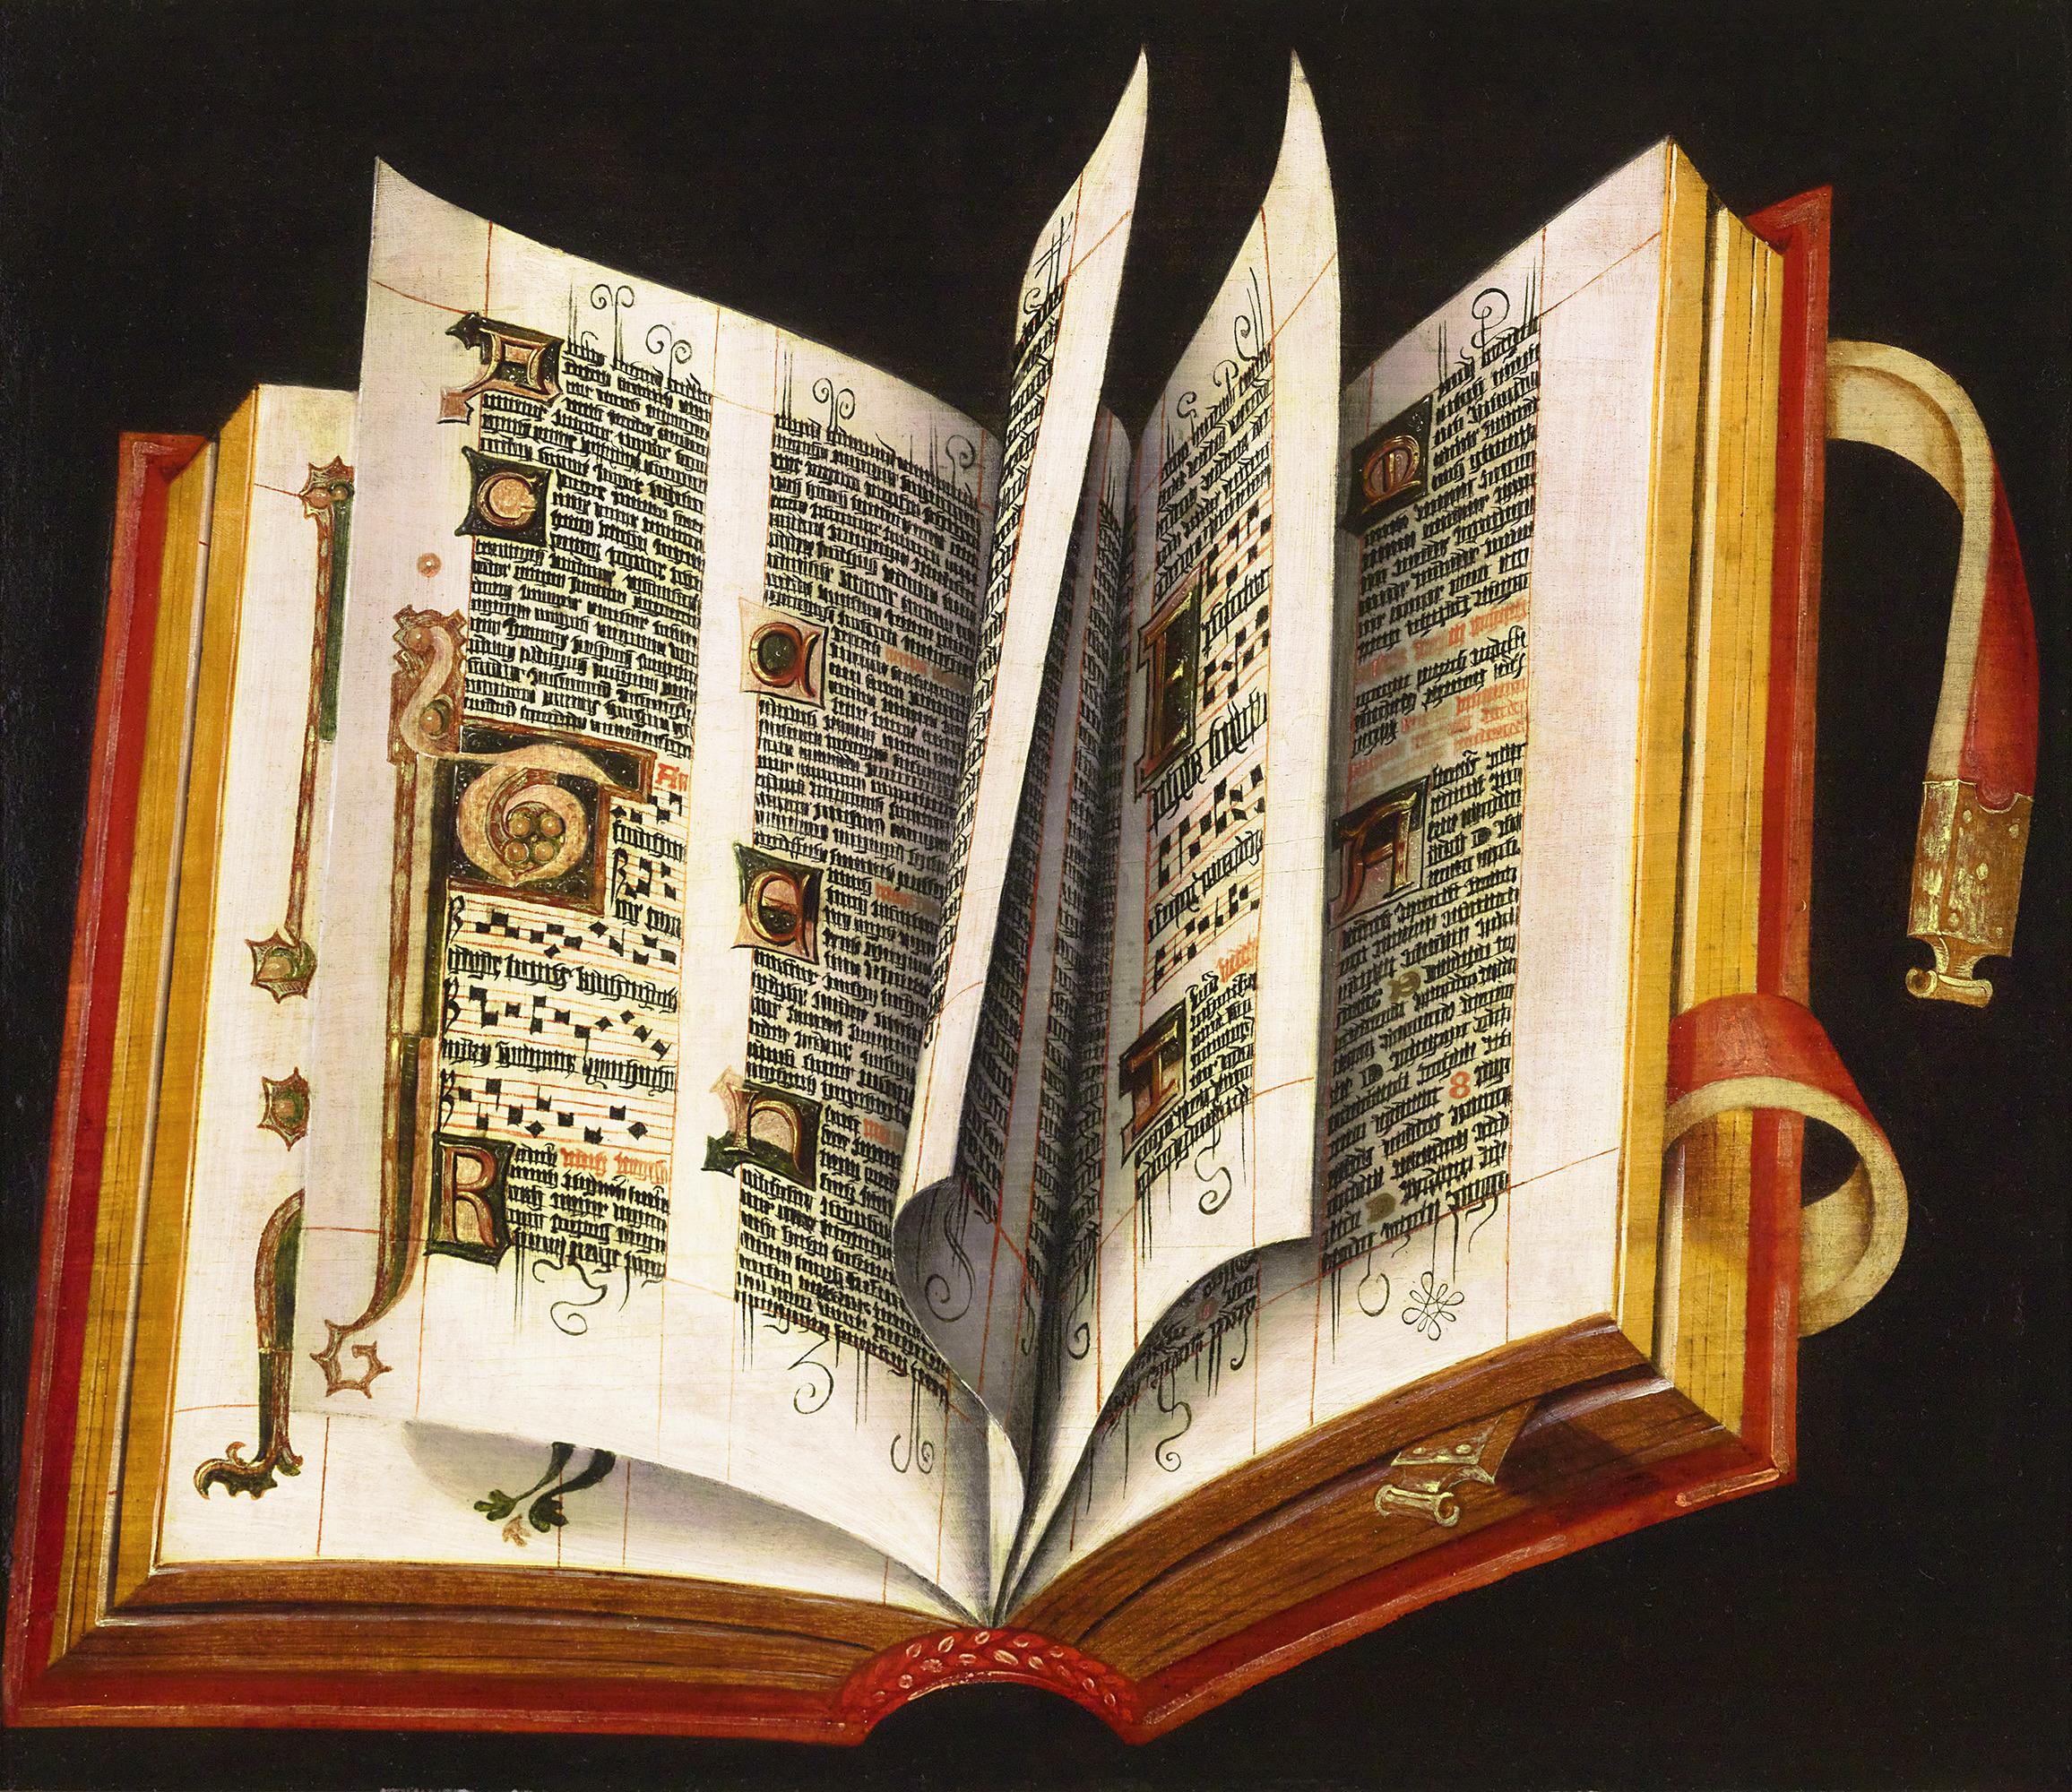 Extraordinary in its beauty and rarity, this early 16th-century German painting of an illuminated manuscript showcases a masterful trompe l’oeil effect. Unequivocally among the finest of only 17 known works of its kind, the oil on panel is both rare